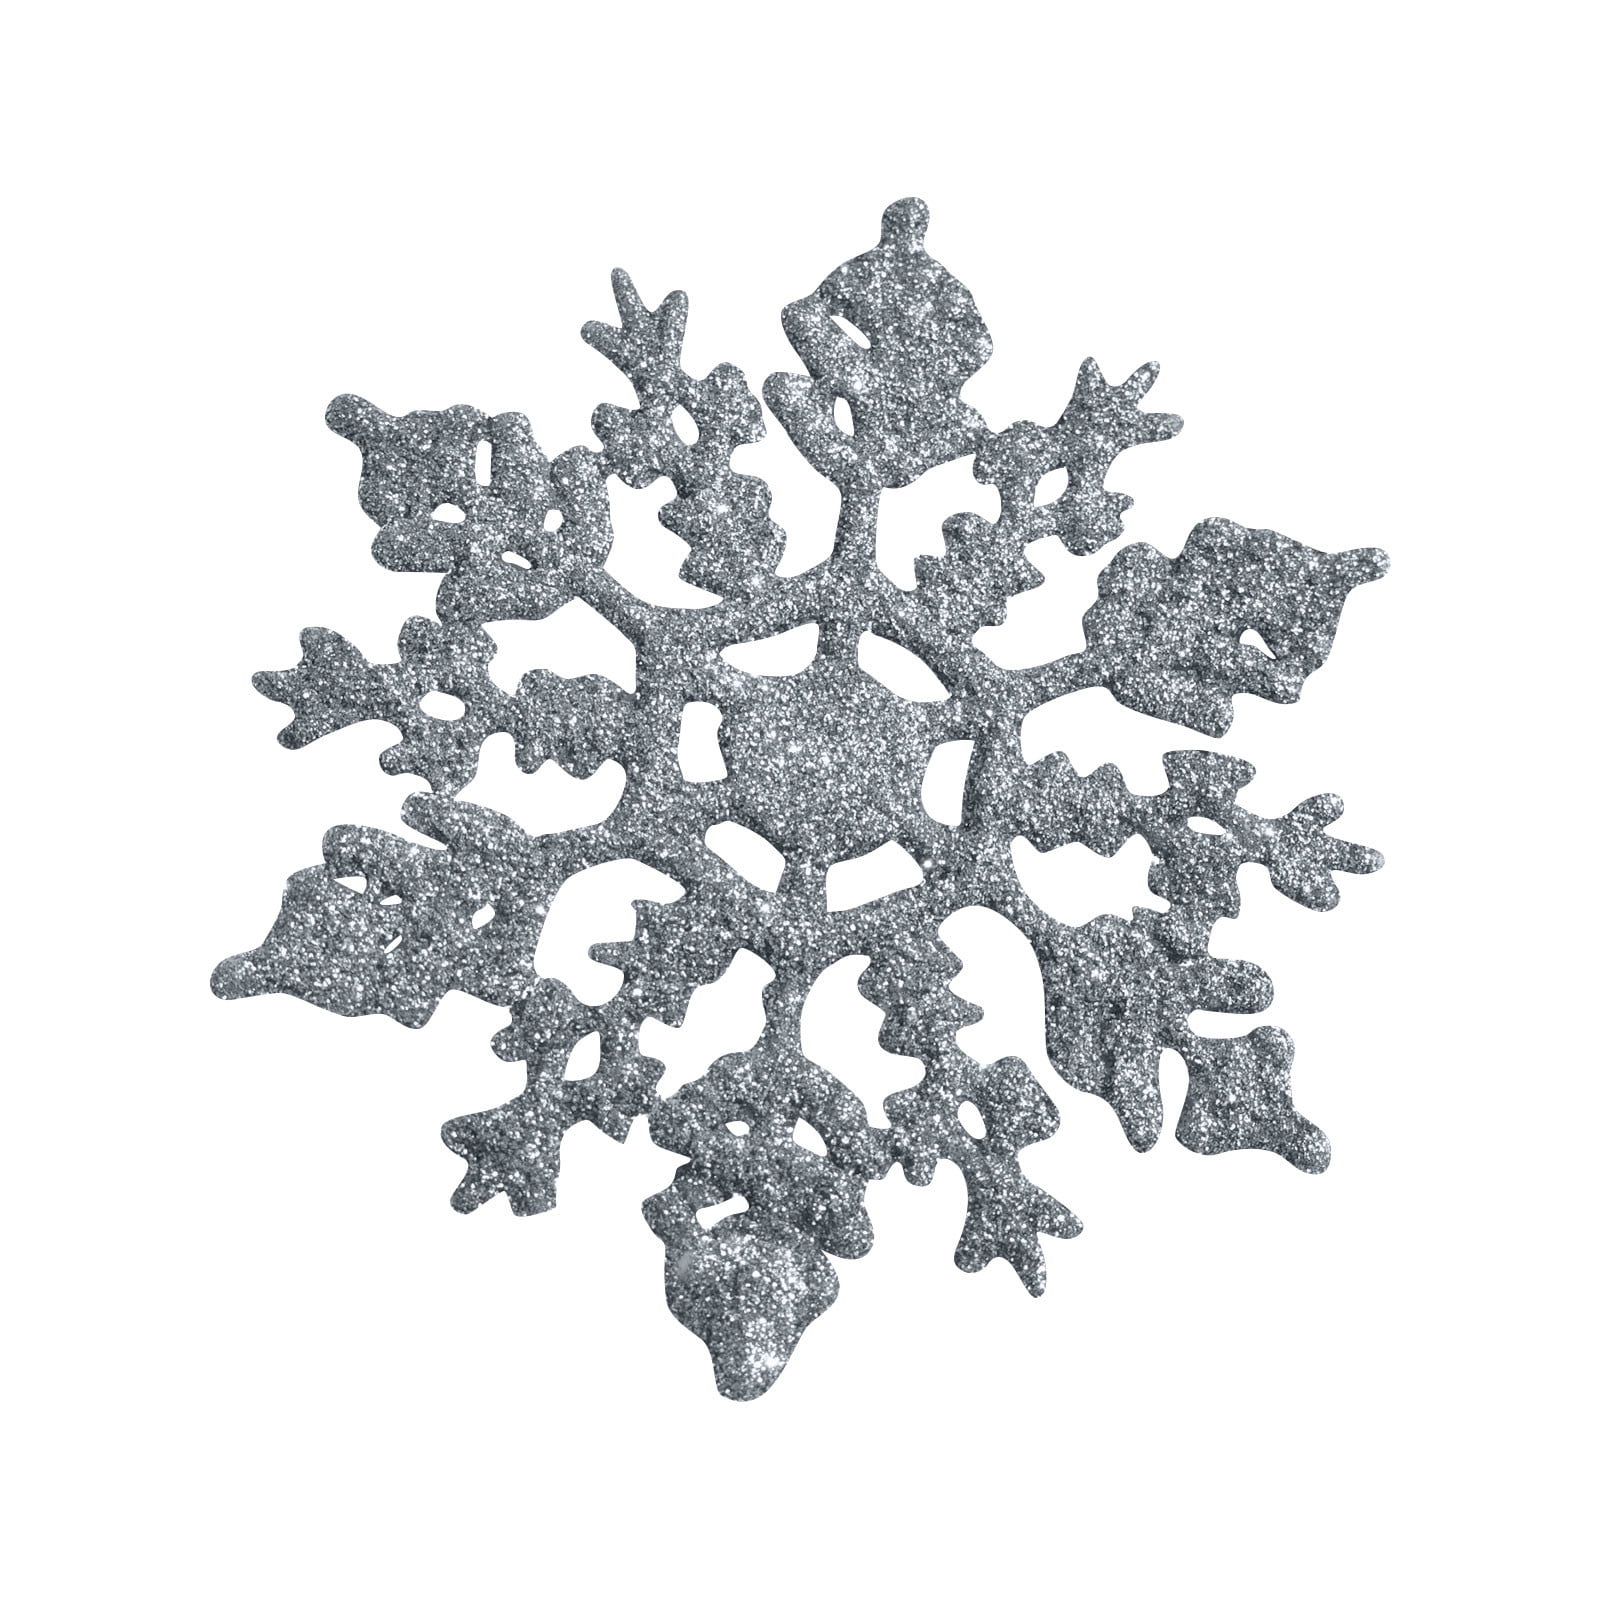 Silver Snowflake Christmas Decoration Covered Bright Glitter Silver Glitter  Texture Snowflake Isolated Xmas Ornament Silver Snow With Bright Sparkle  Stock Illustration - Download Image Now - iStock